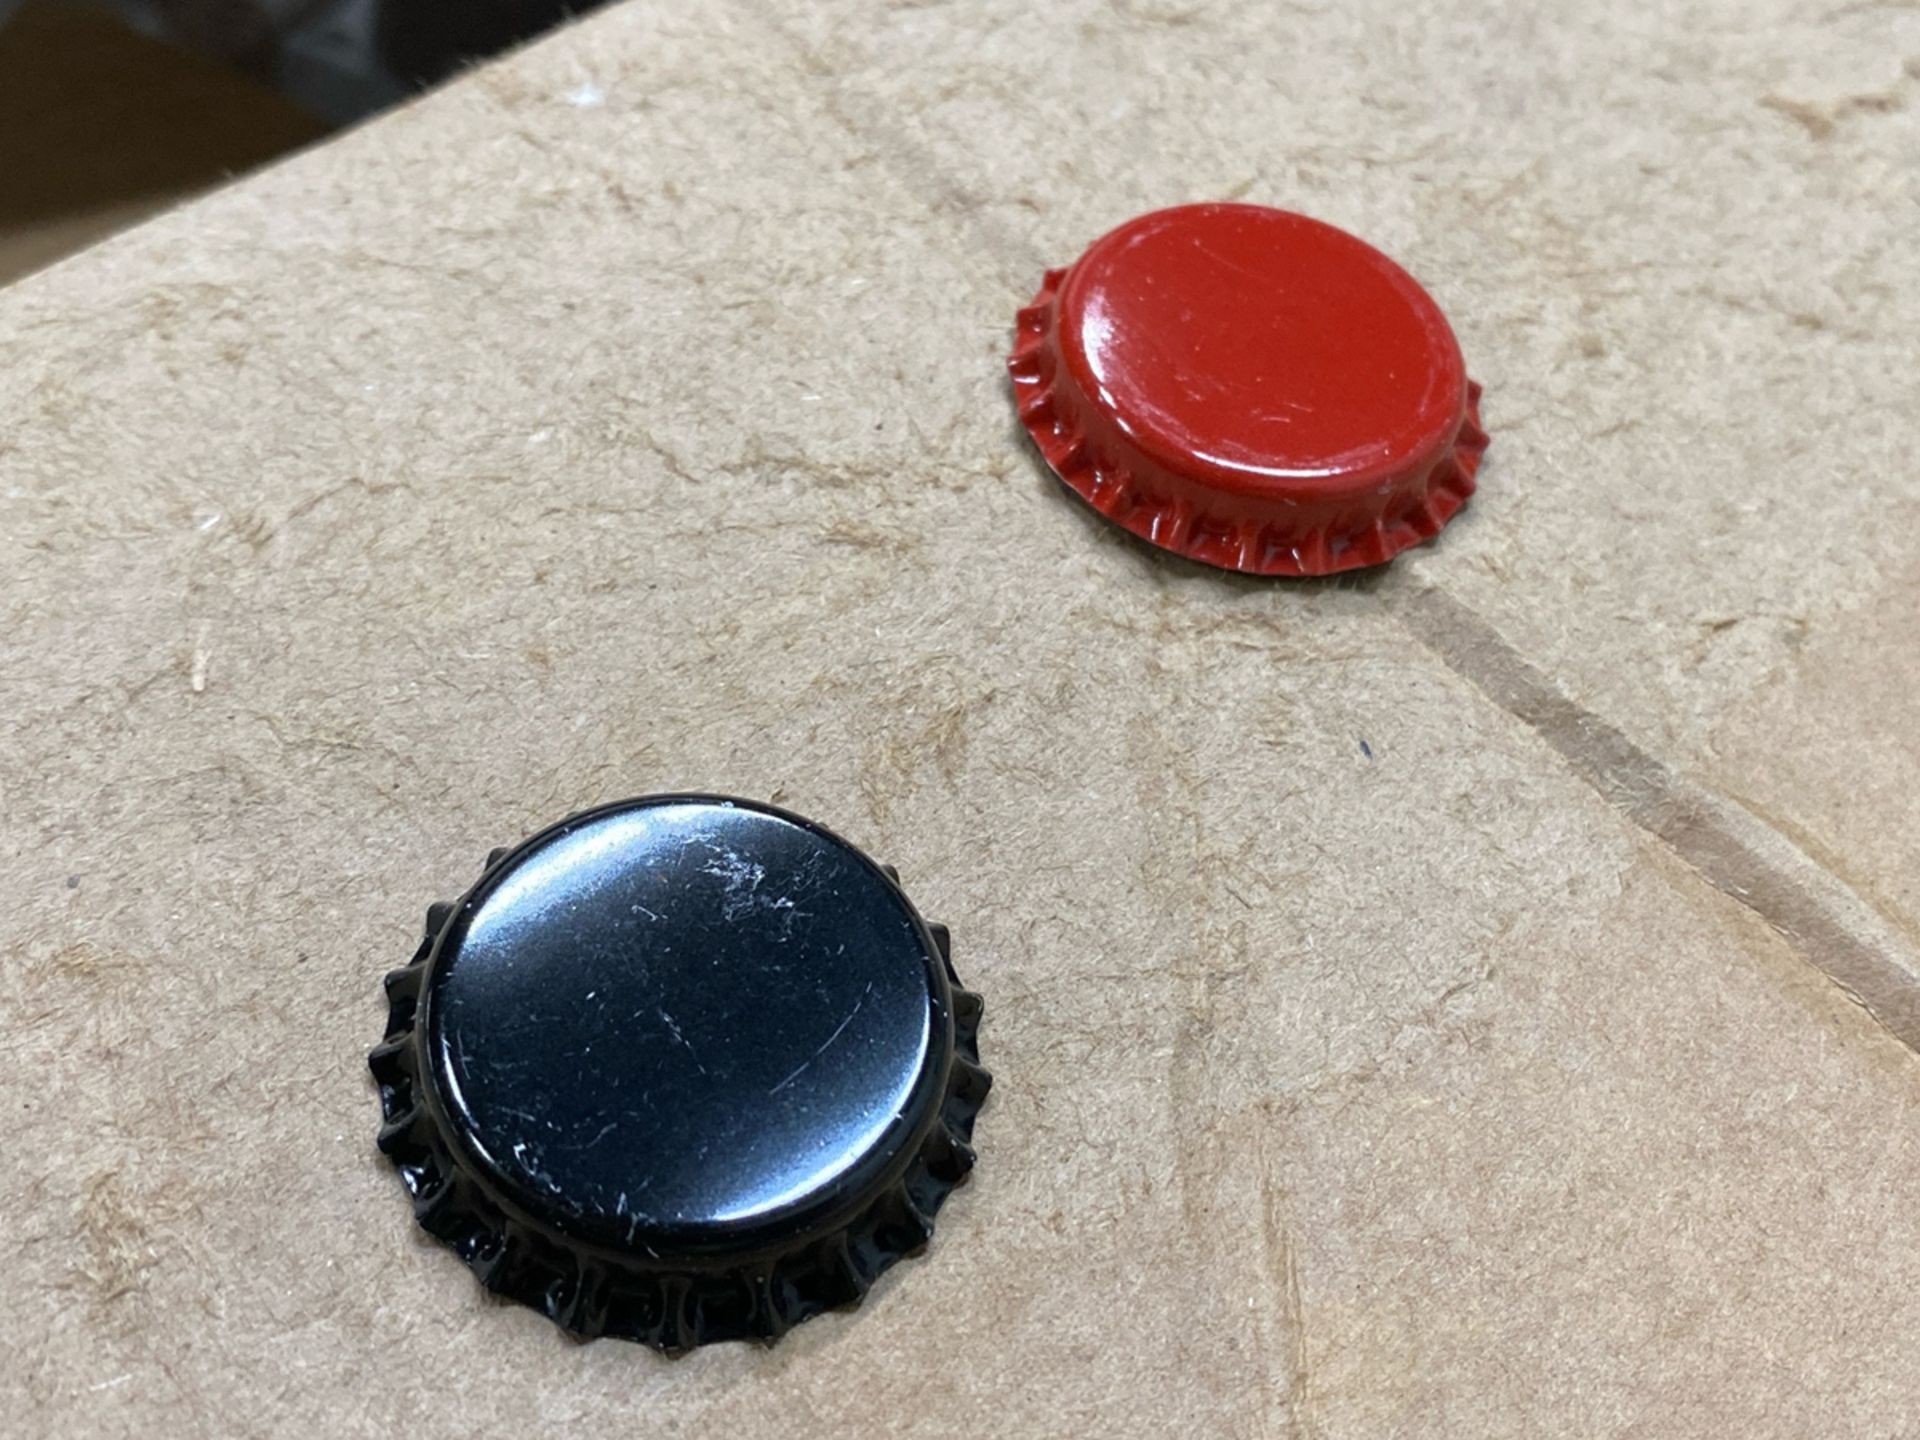 A Group of Red Bottle Caps and Black Bottle Caps - Image 2 of 4